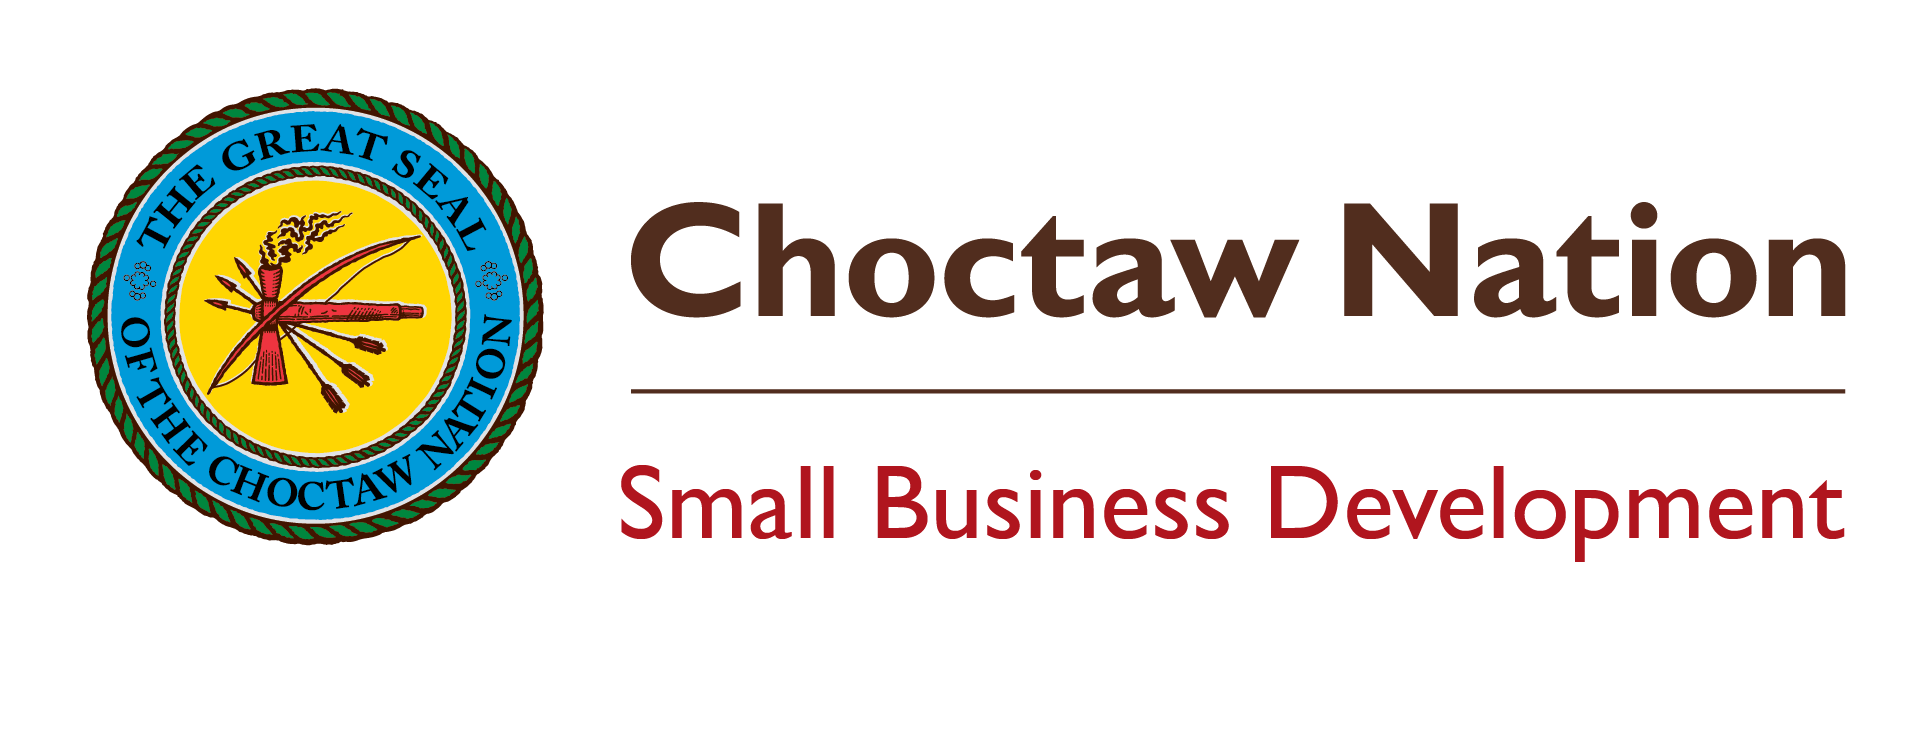 Choctaw Nation of Oklahoma Small Business Development Services